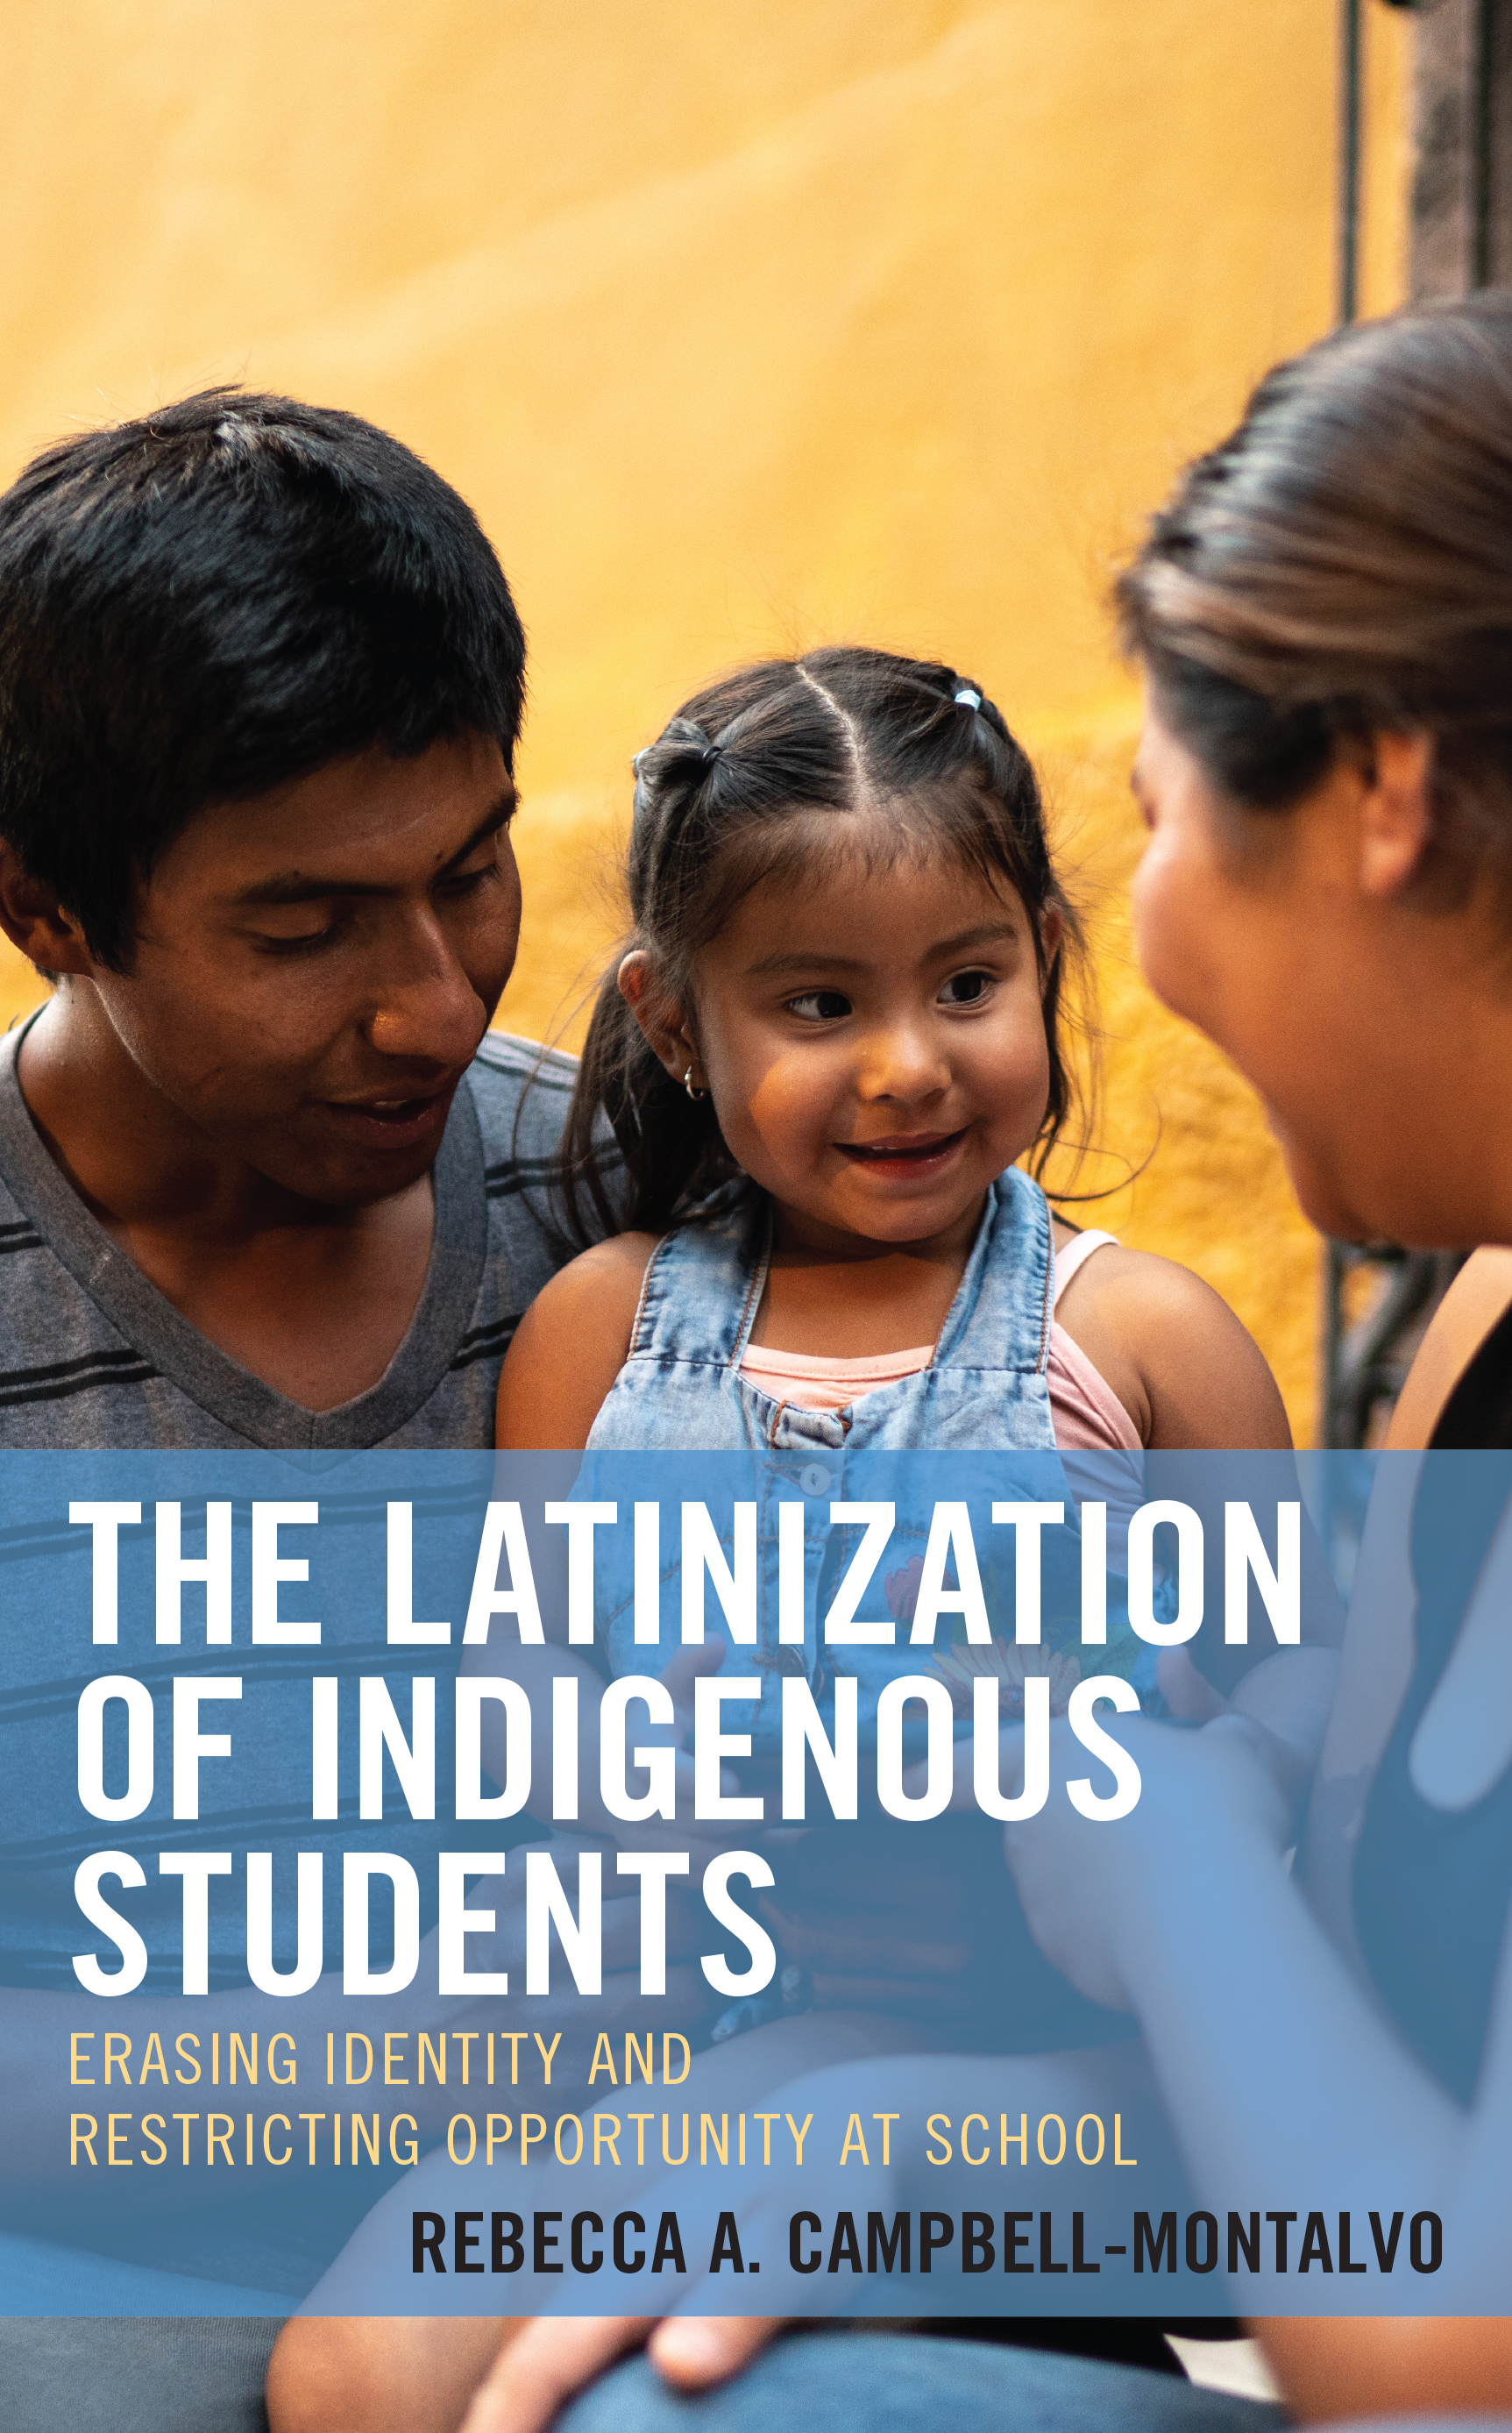 The Latinization of Indigenous Students: Erasing Identity and Restricting Opportunity at School